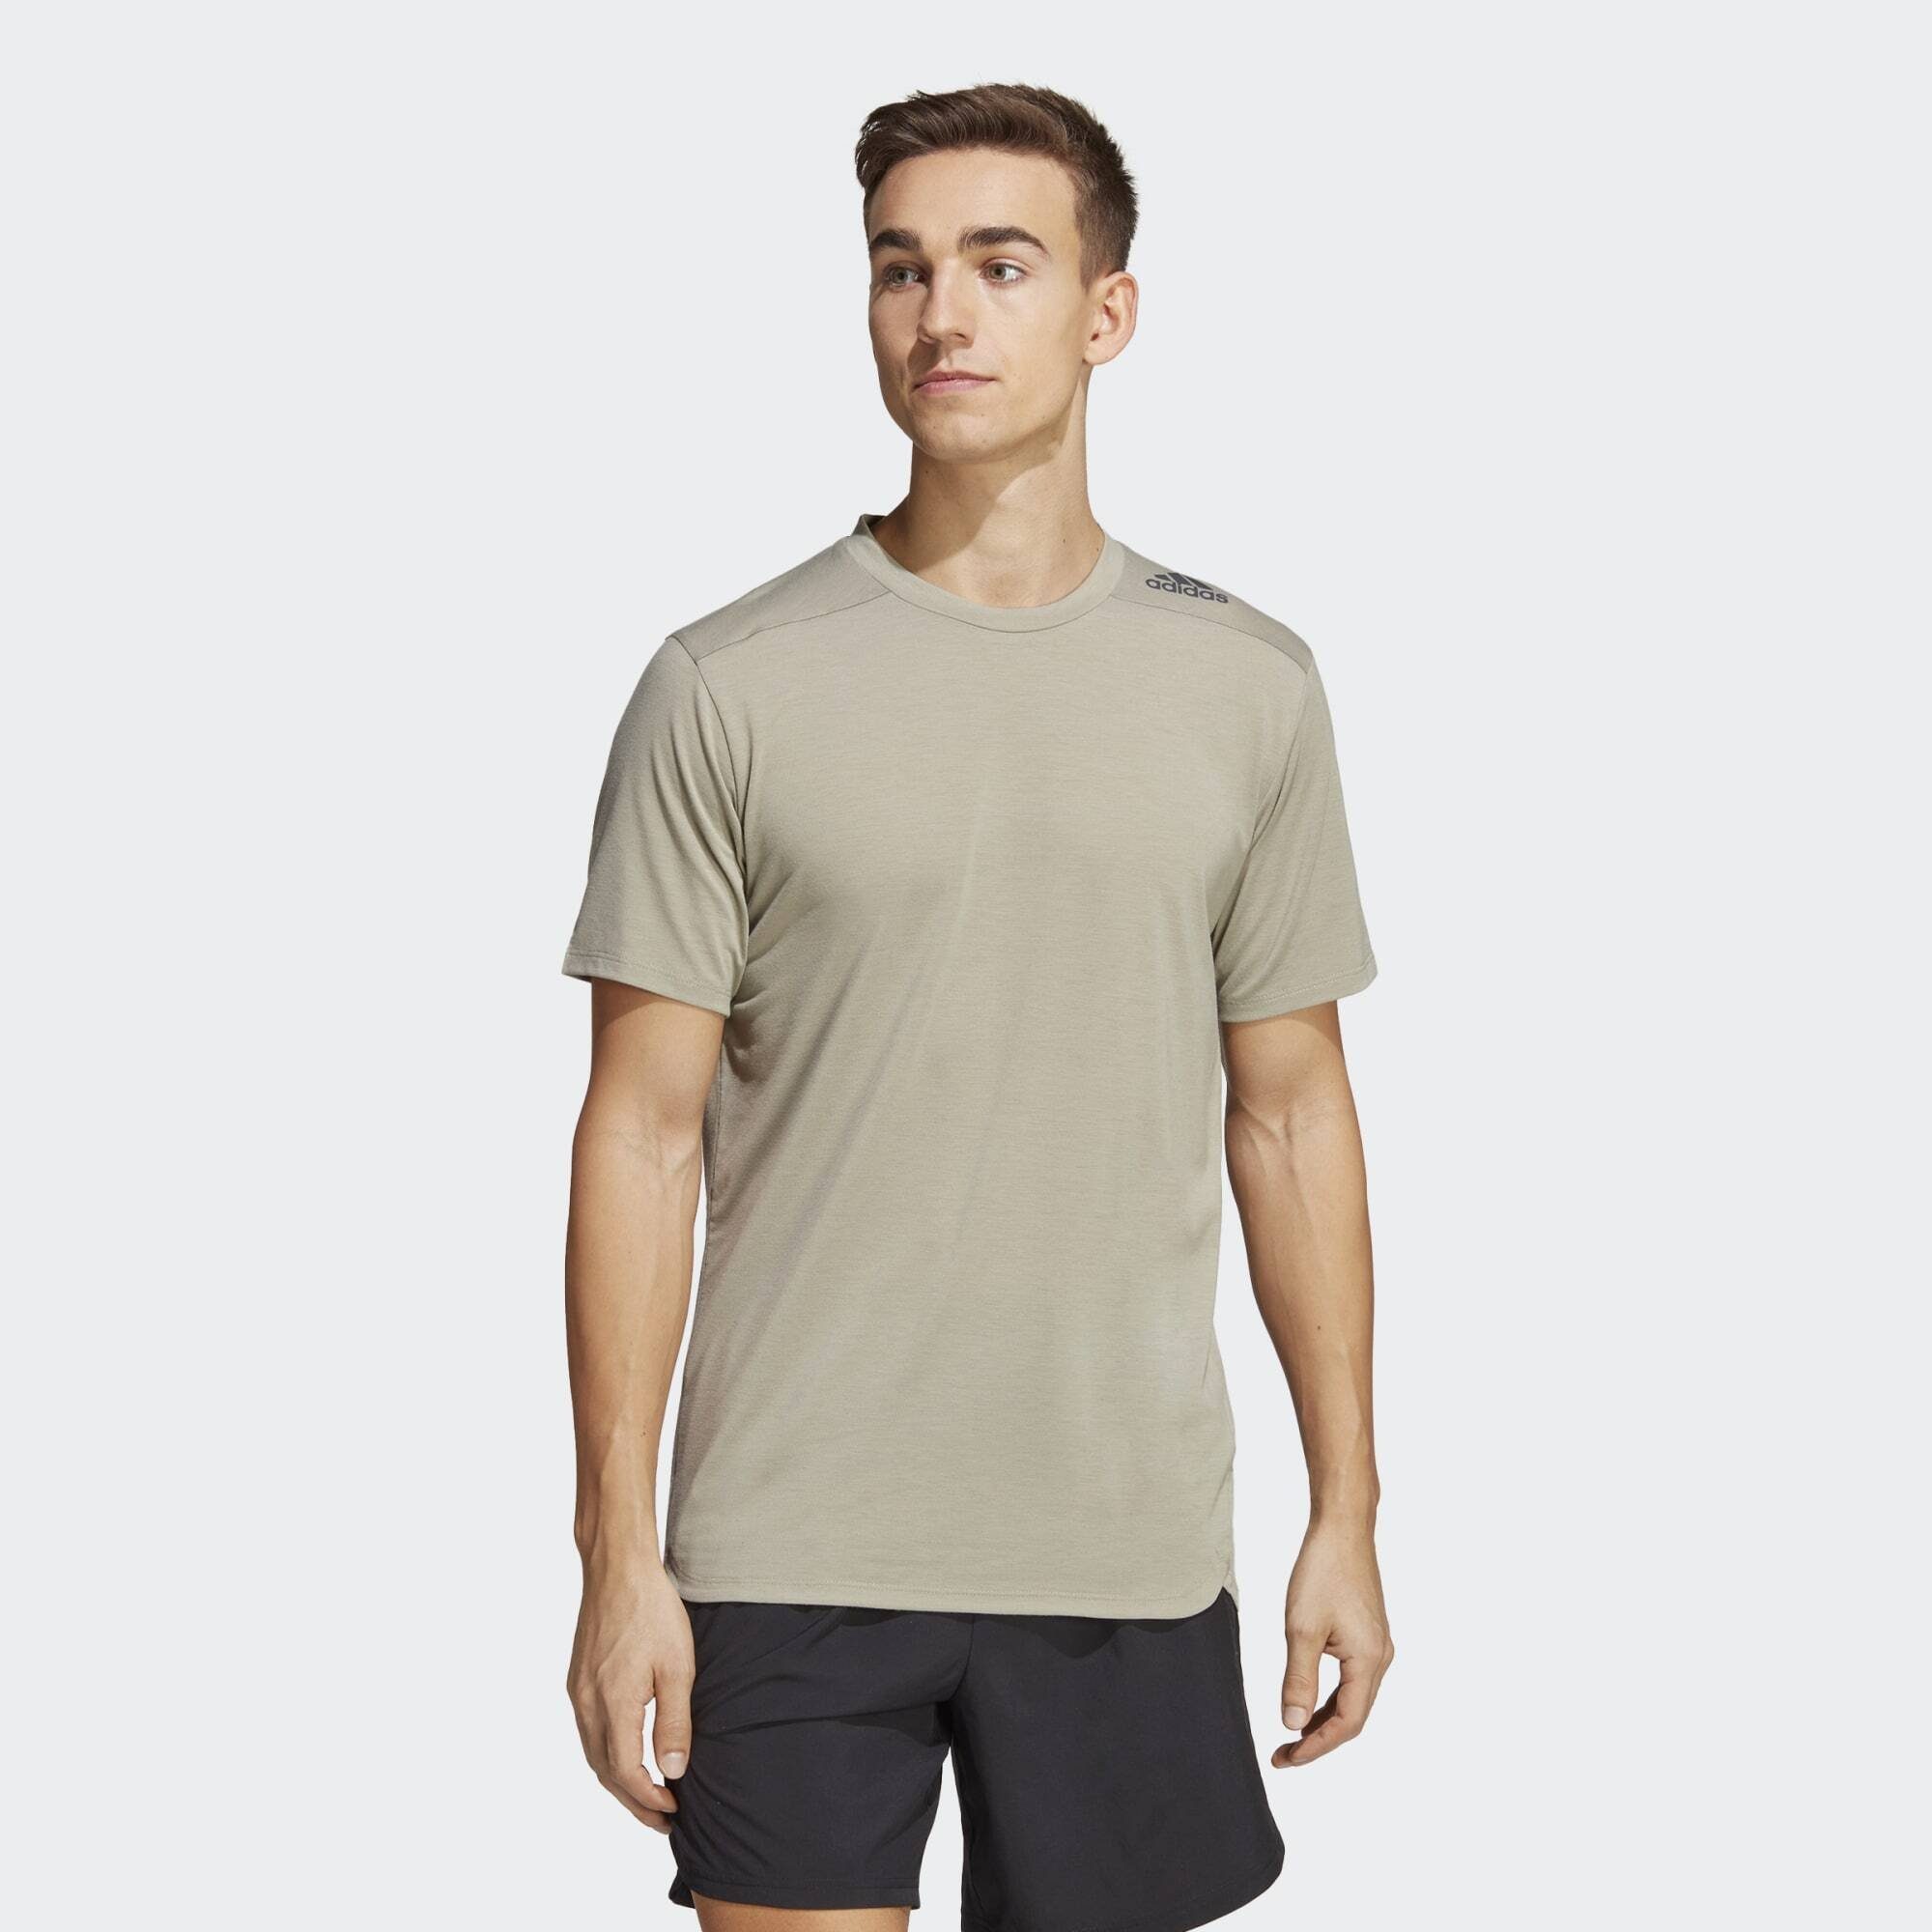 adidas Performance Funktionsshirt DESIGNED FOR TRAINING T-SHIRT Silver Pebble